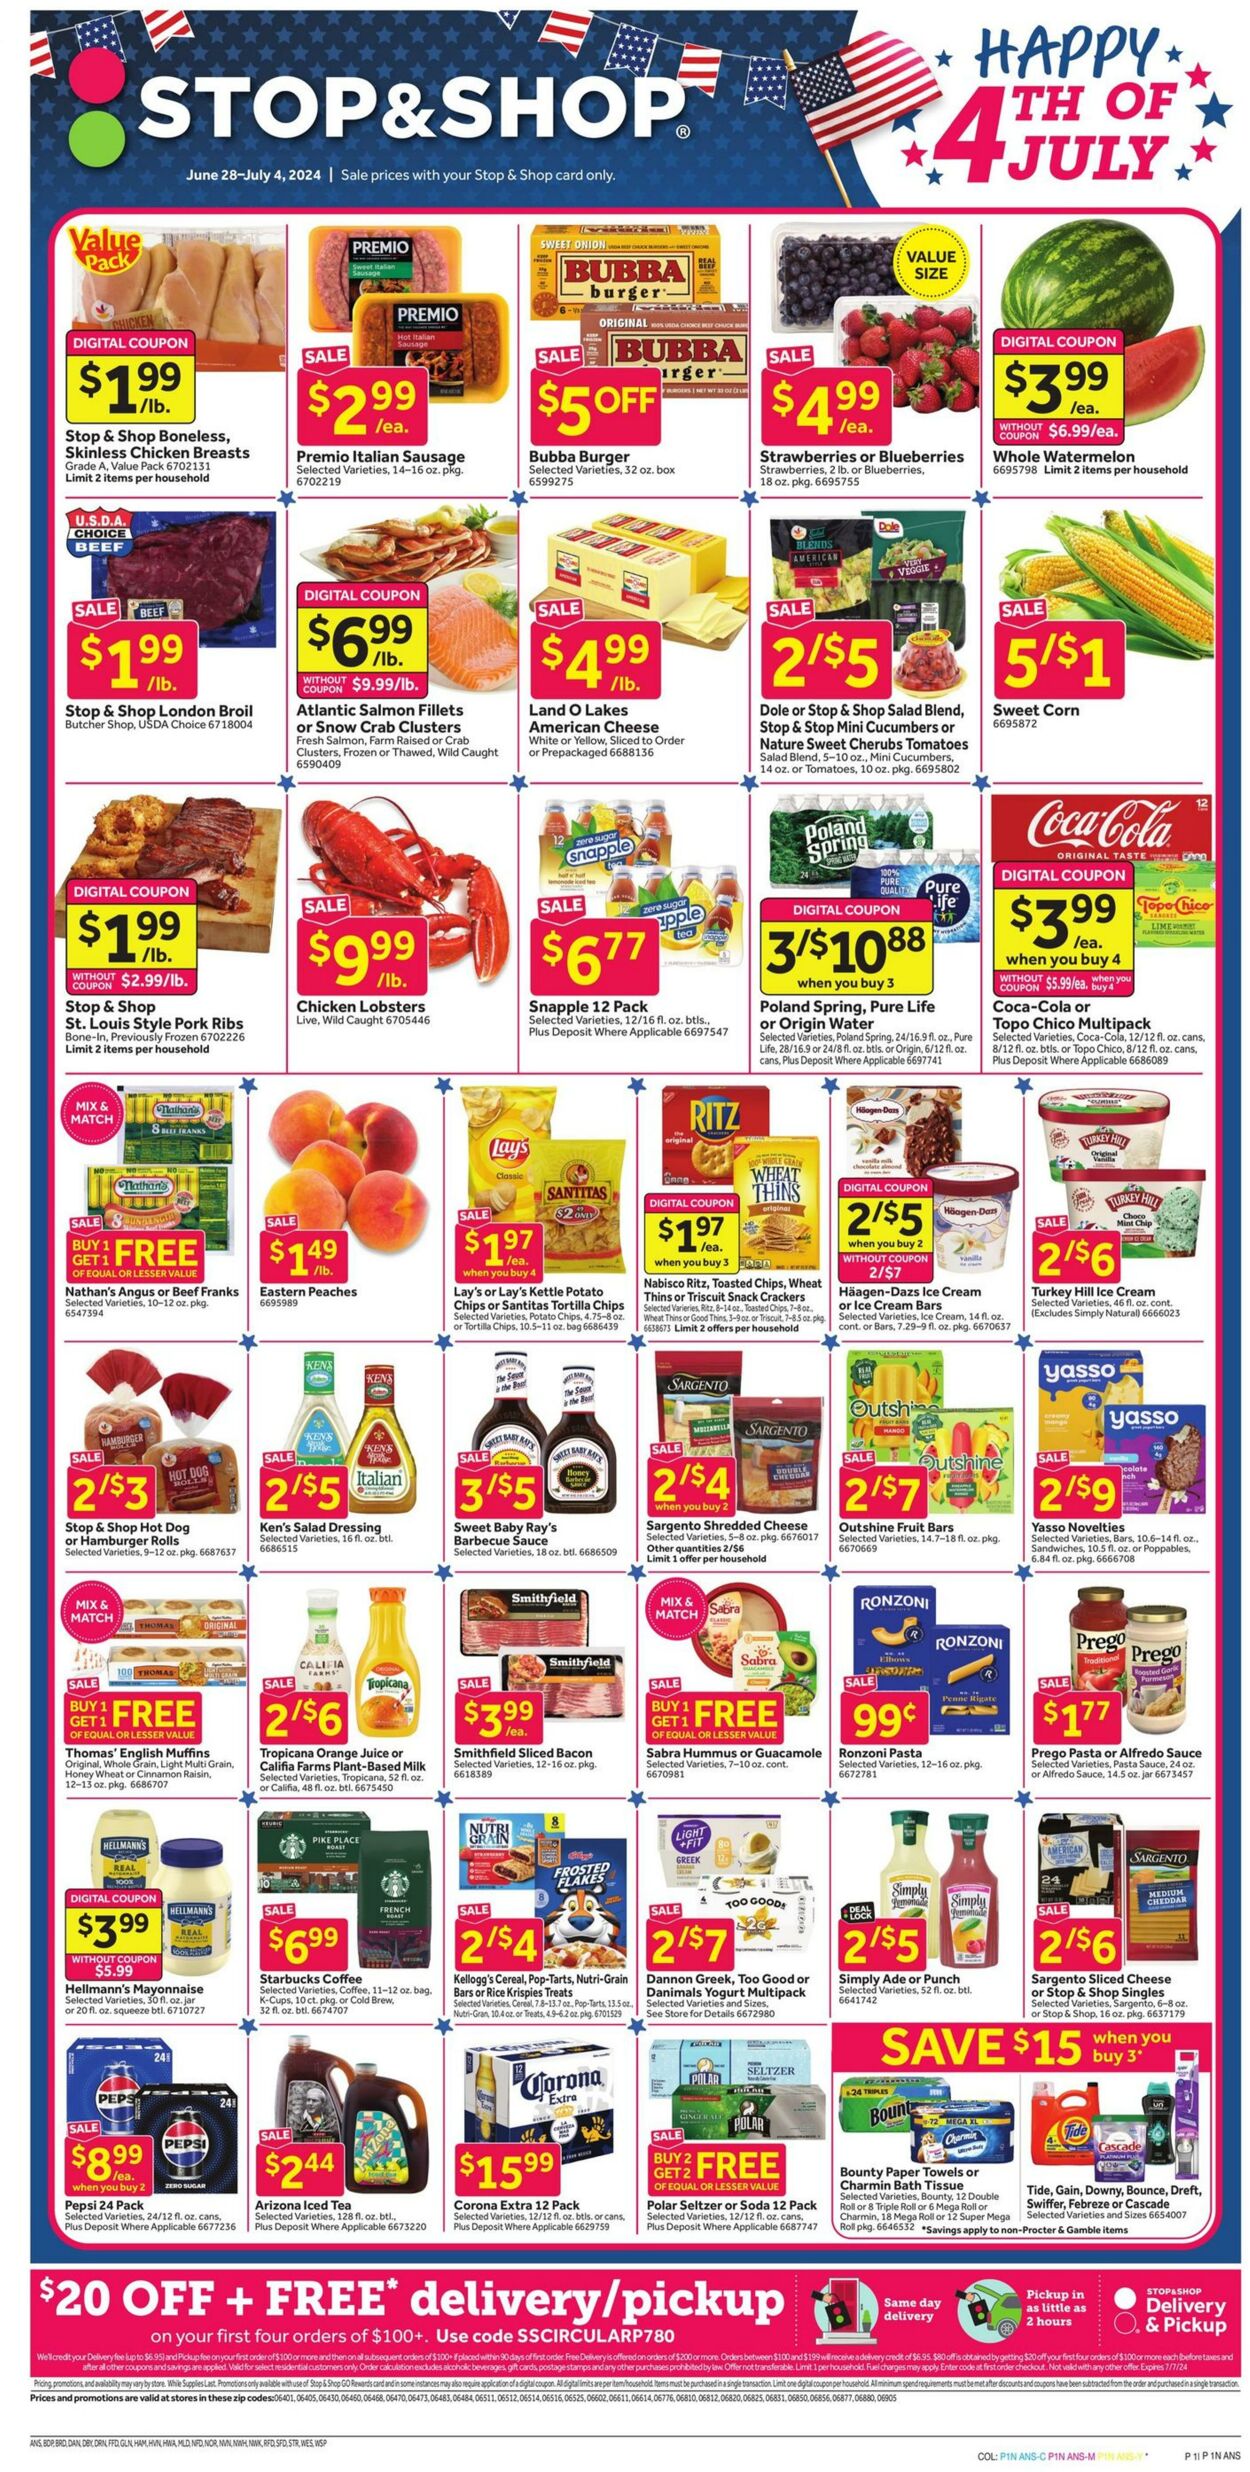 Stop & Shop Promotional weekly ads